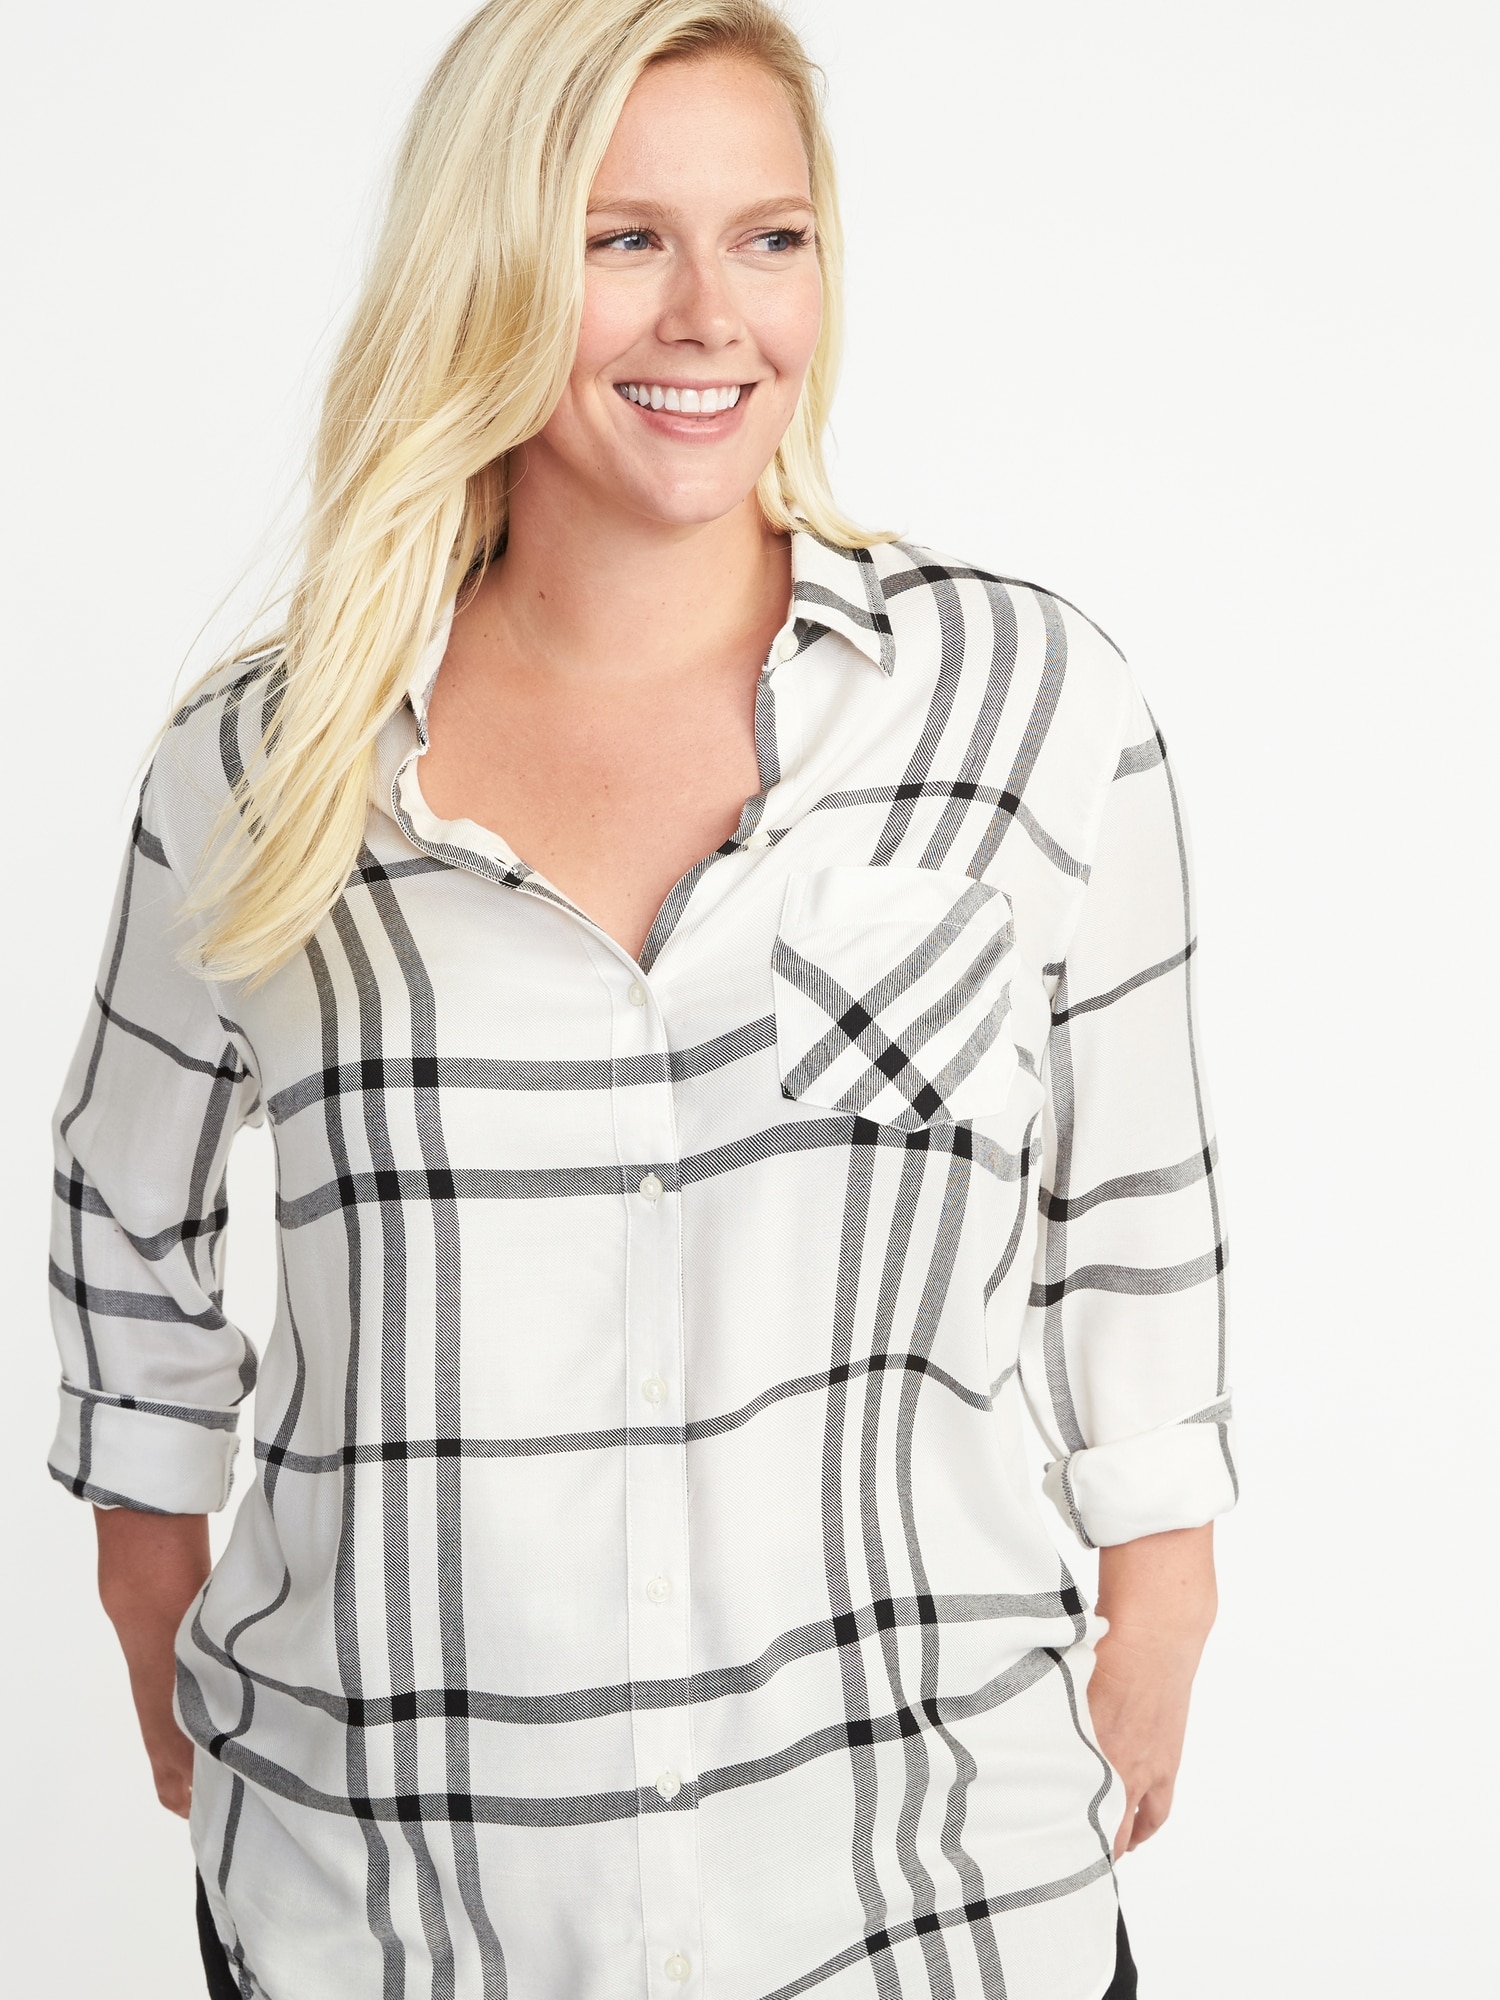 Plus-Size Classic Tunic | Old Navy